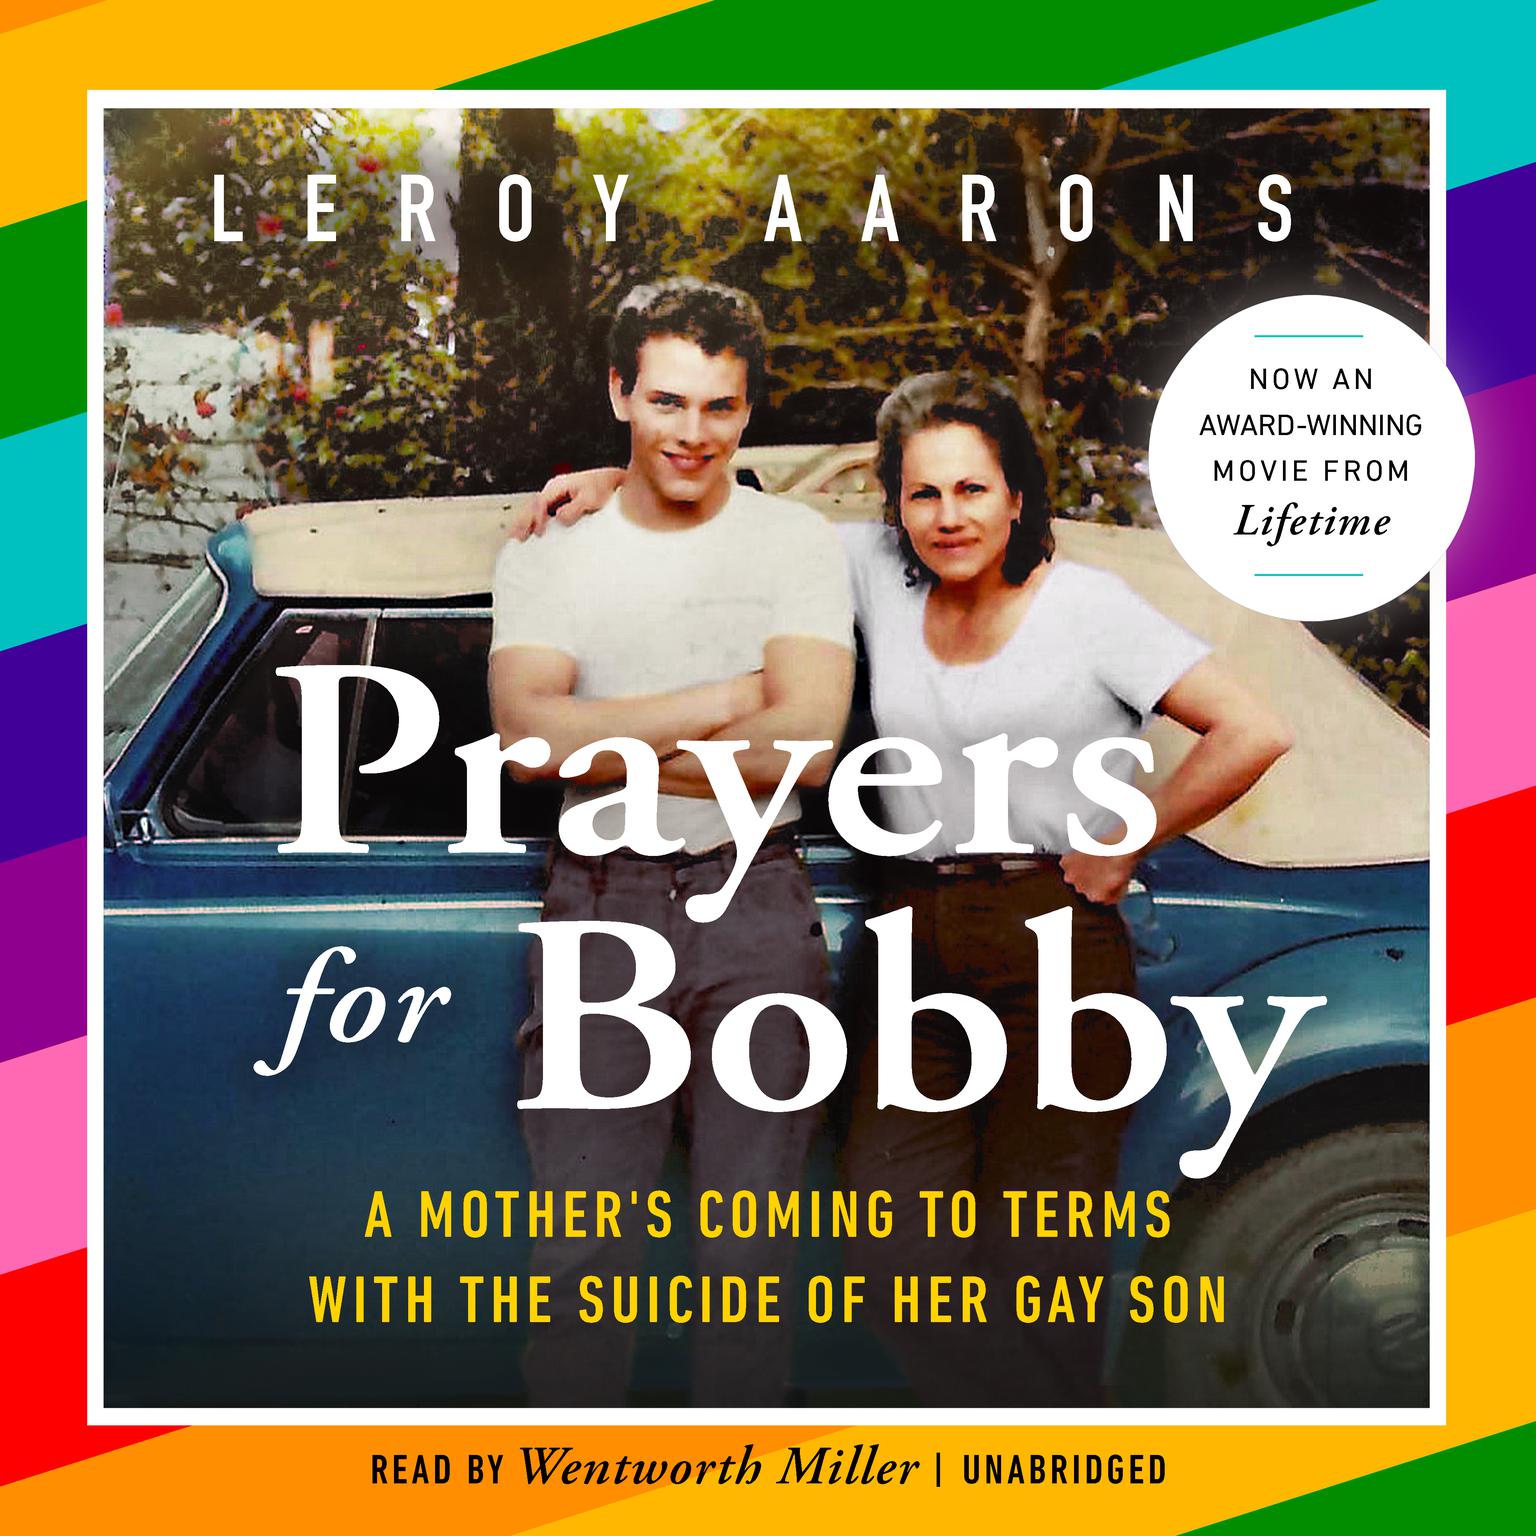 Prayers for Bobby: A Mothers Coming to Terms with the Suicide of Her Gay Son Audiobook, by Leroy Aarons